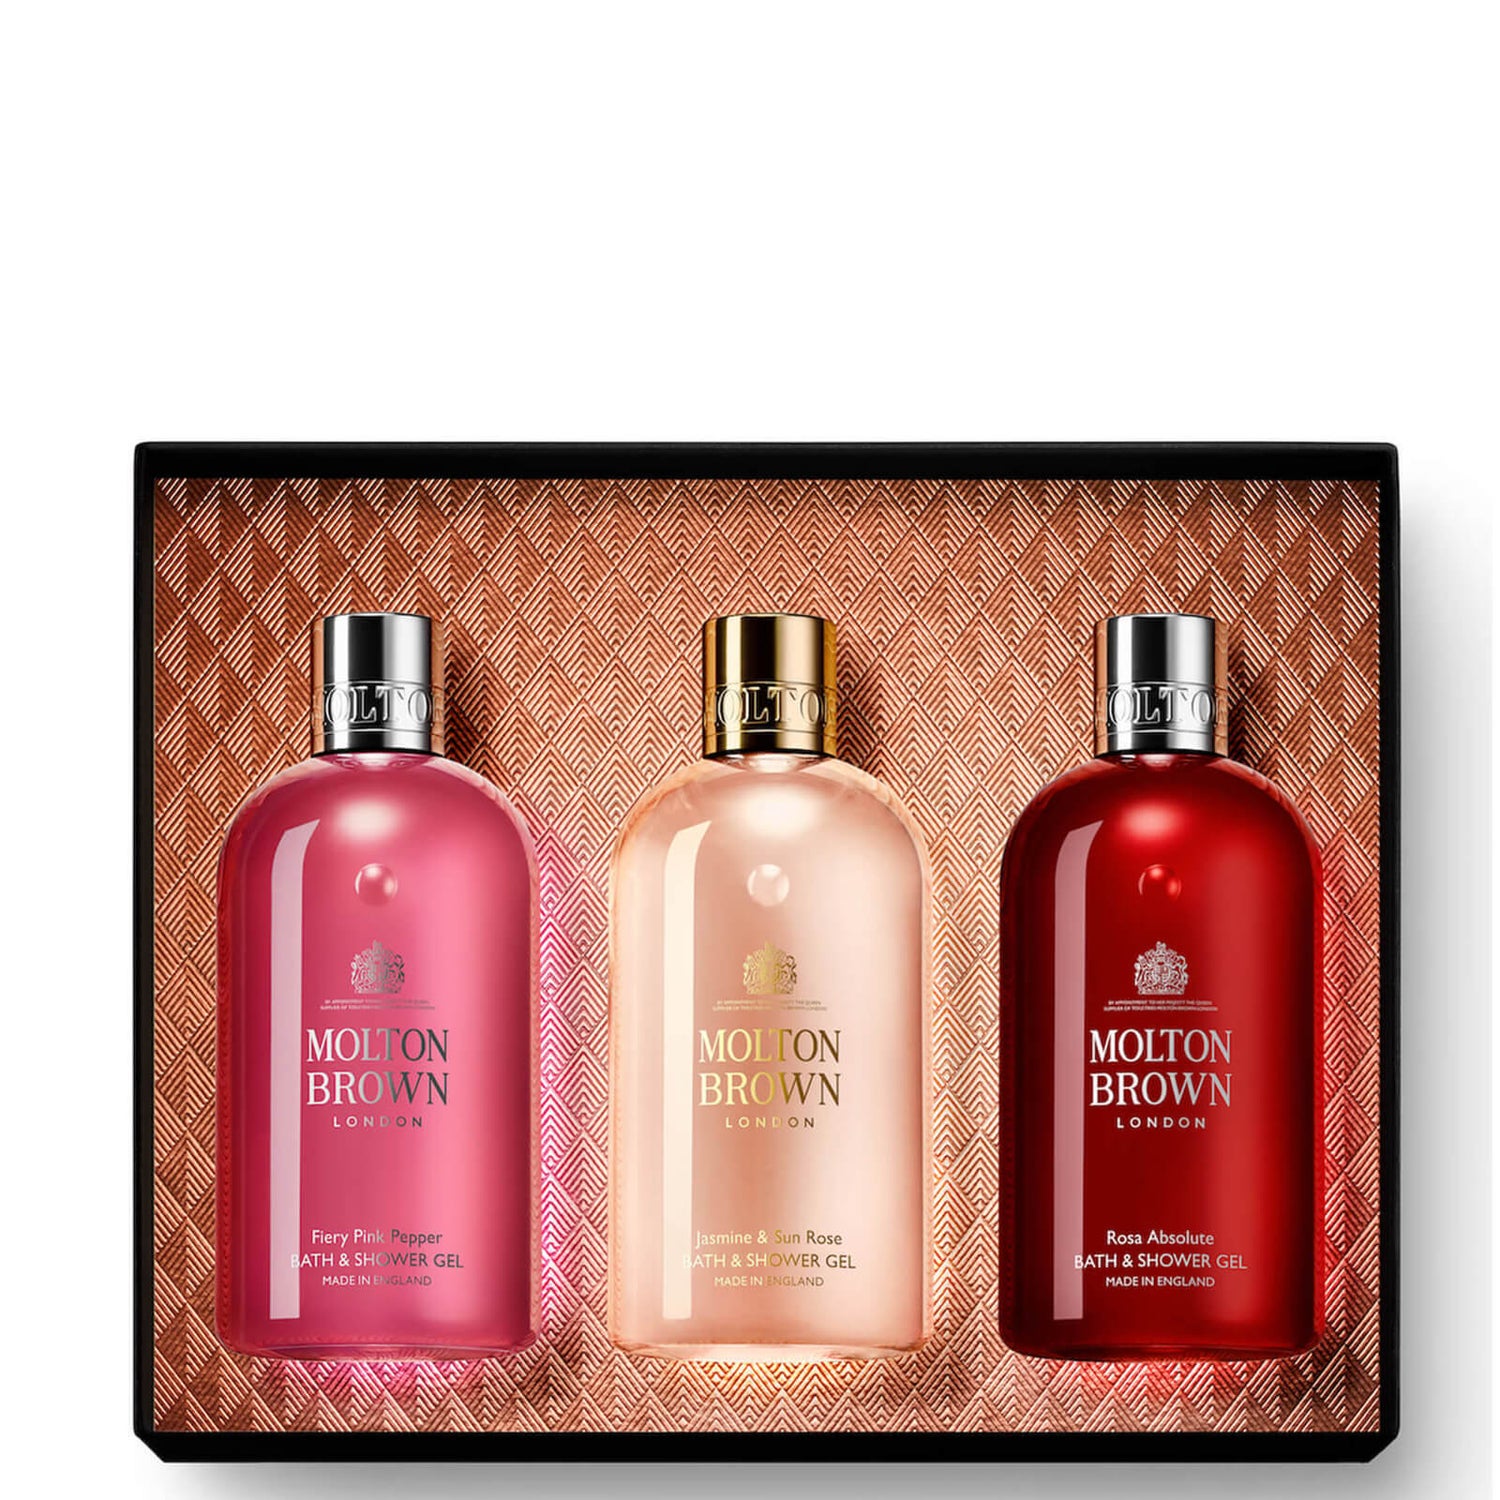 Molton Brown Floral and Chypre Gift Set (Worth £66.00)